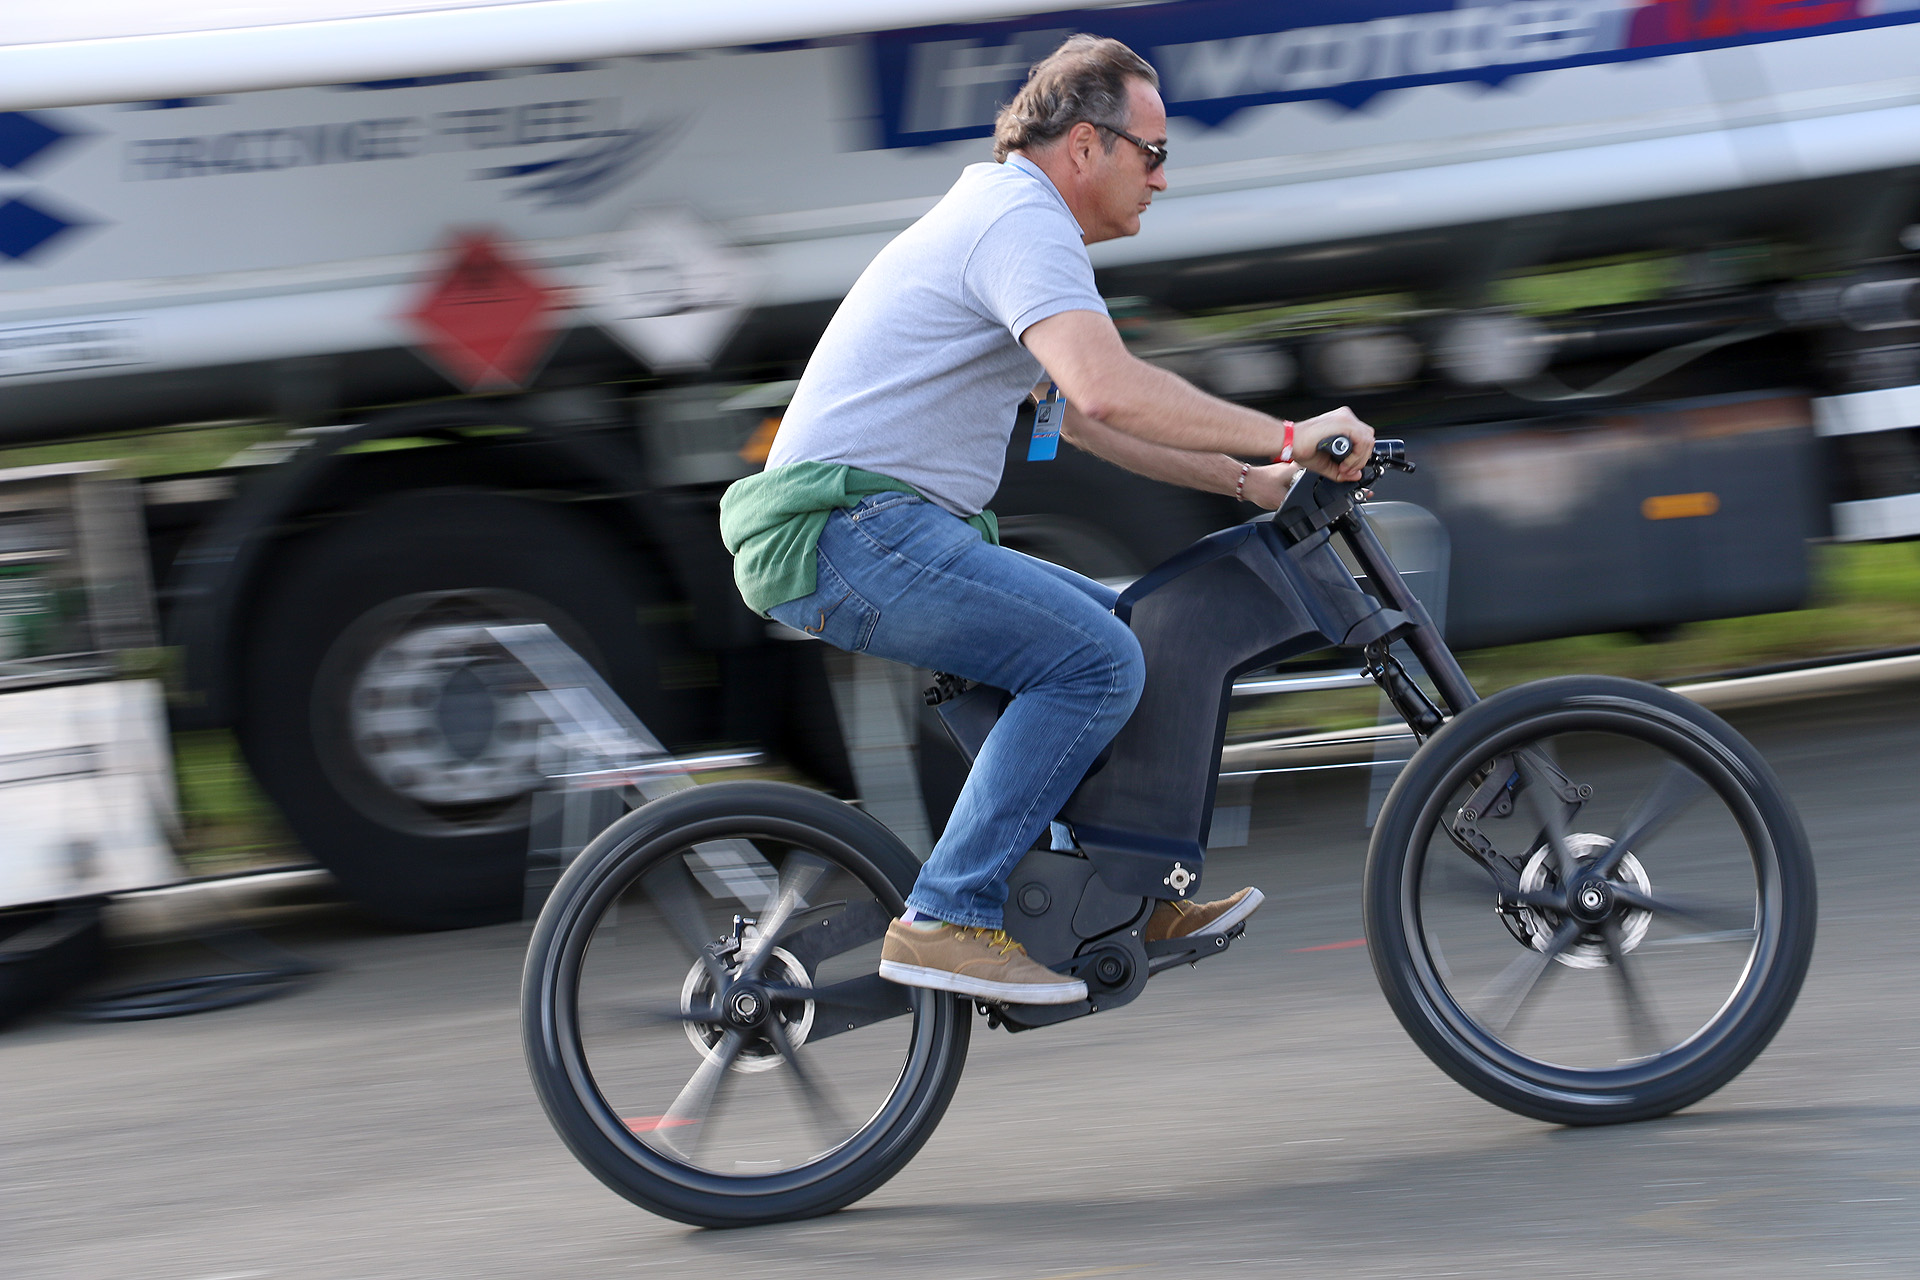 What It’s Like To Ride This Incredible E-Bike At 60km/h